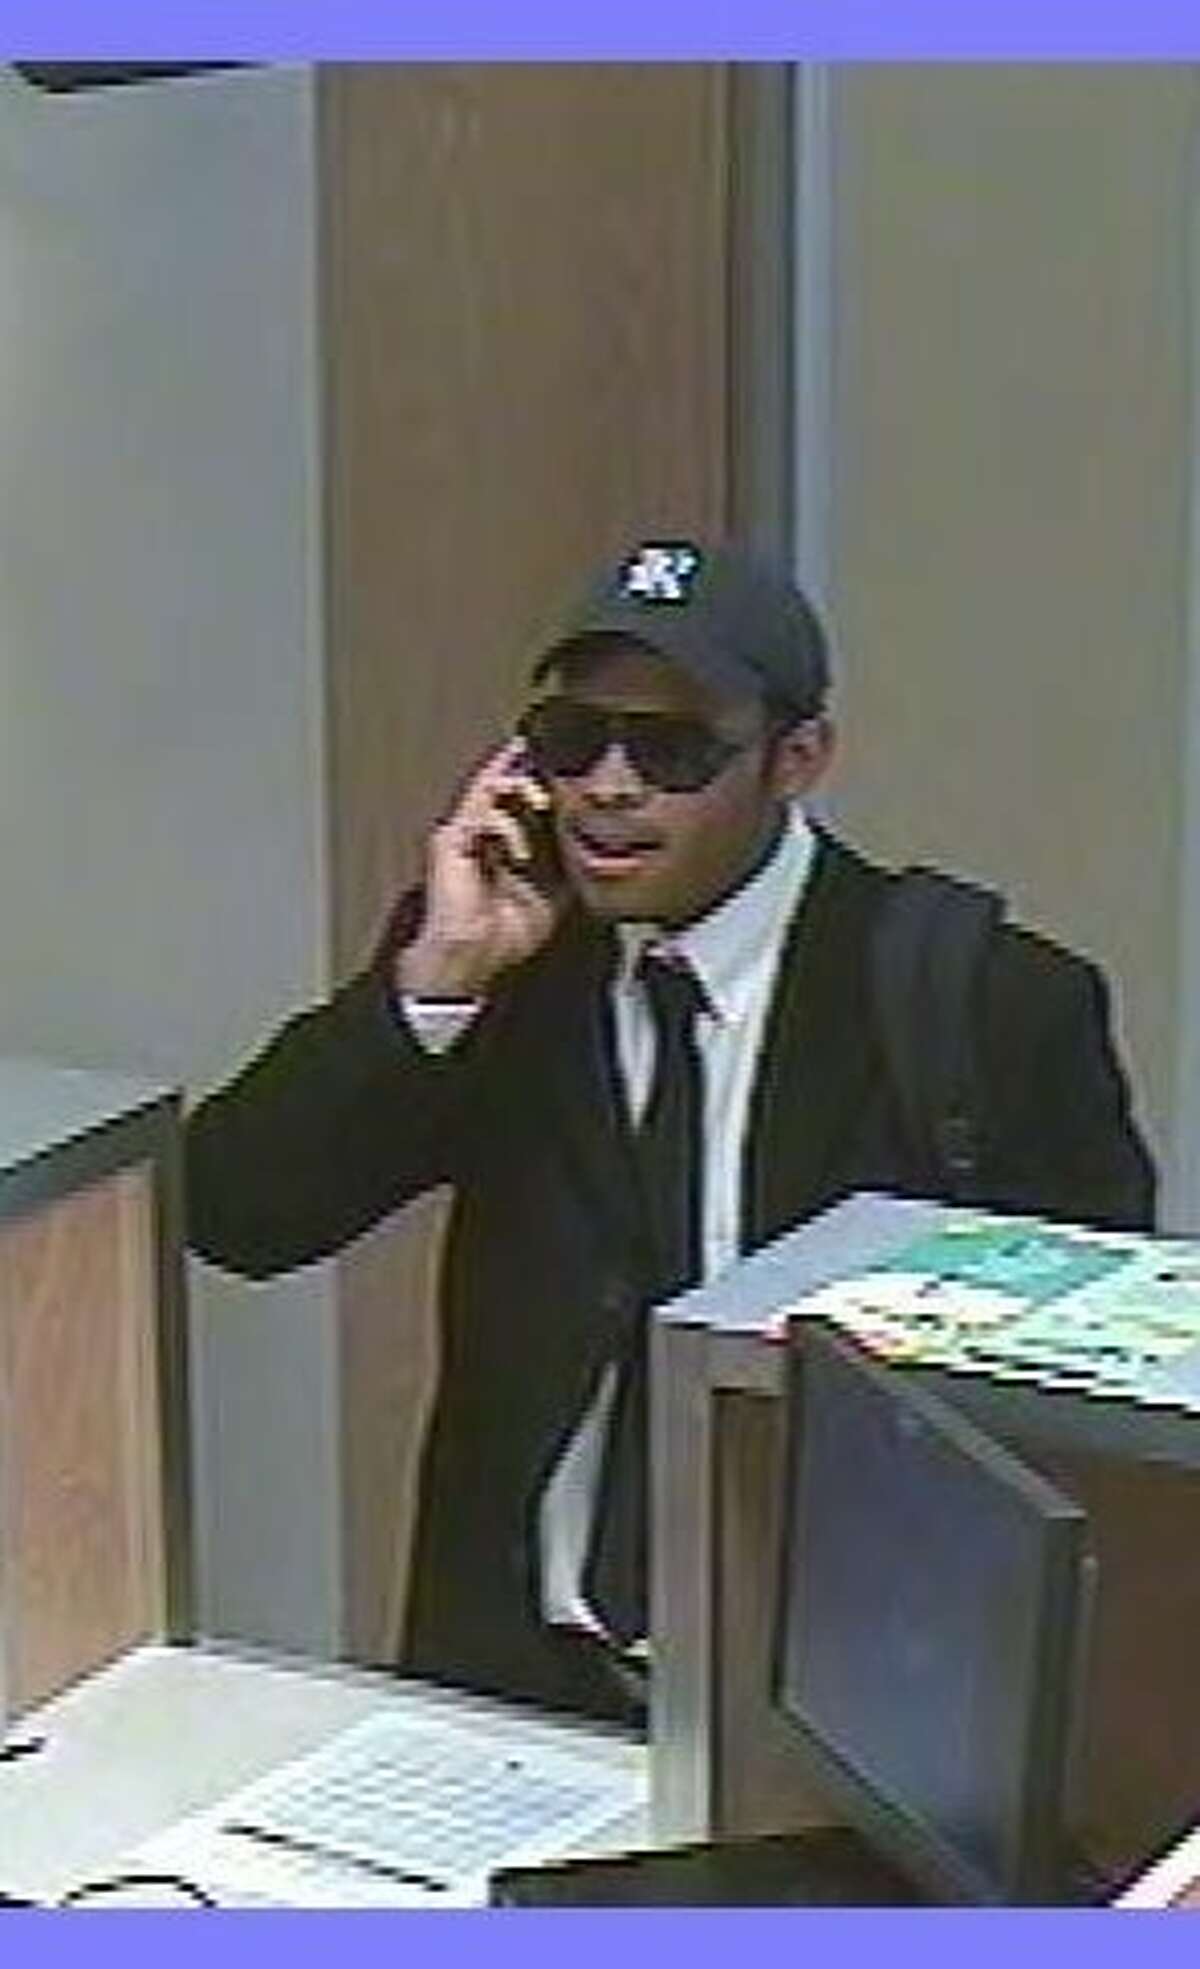 Authorities said it was Copeland who robbed this Comerica bank branch in the West University area last week.